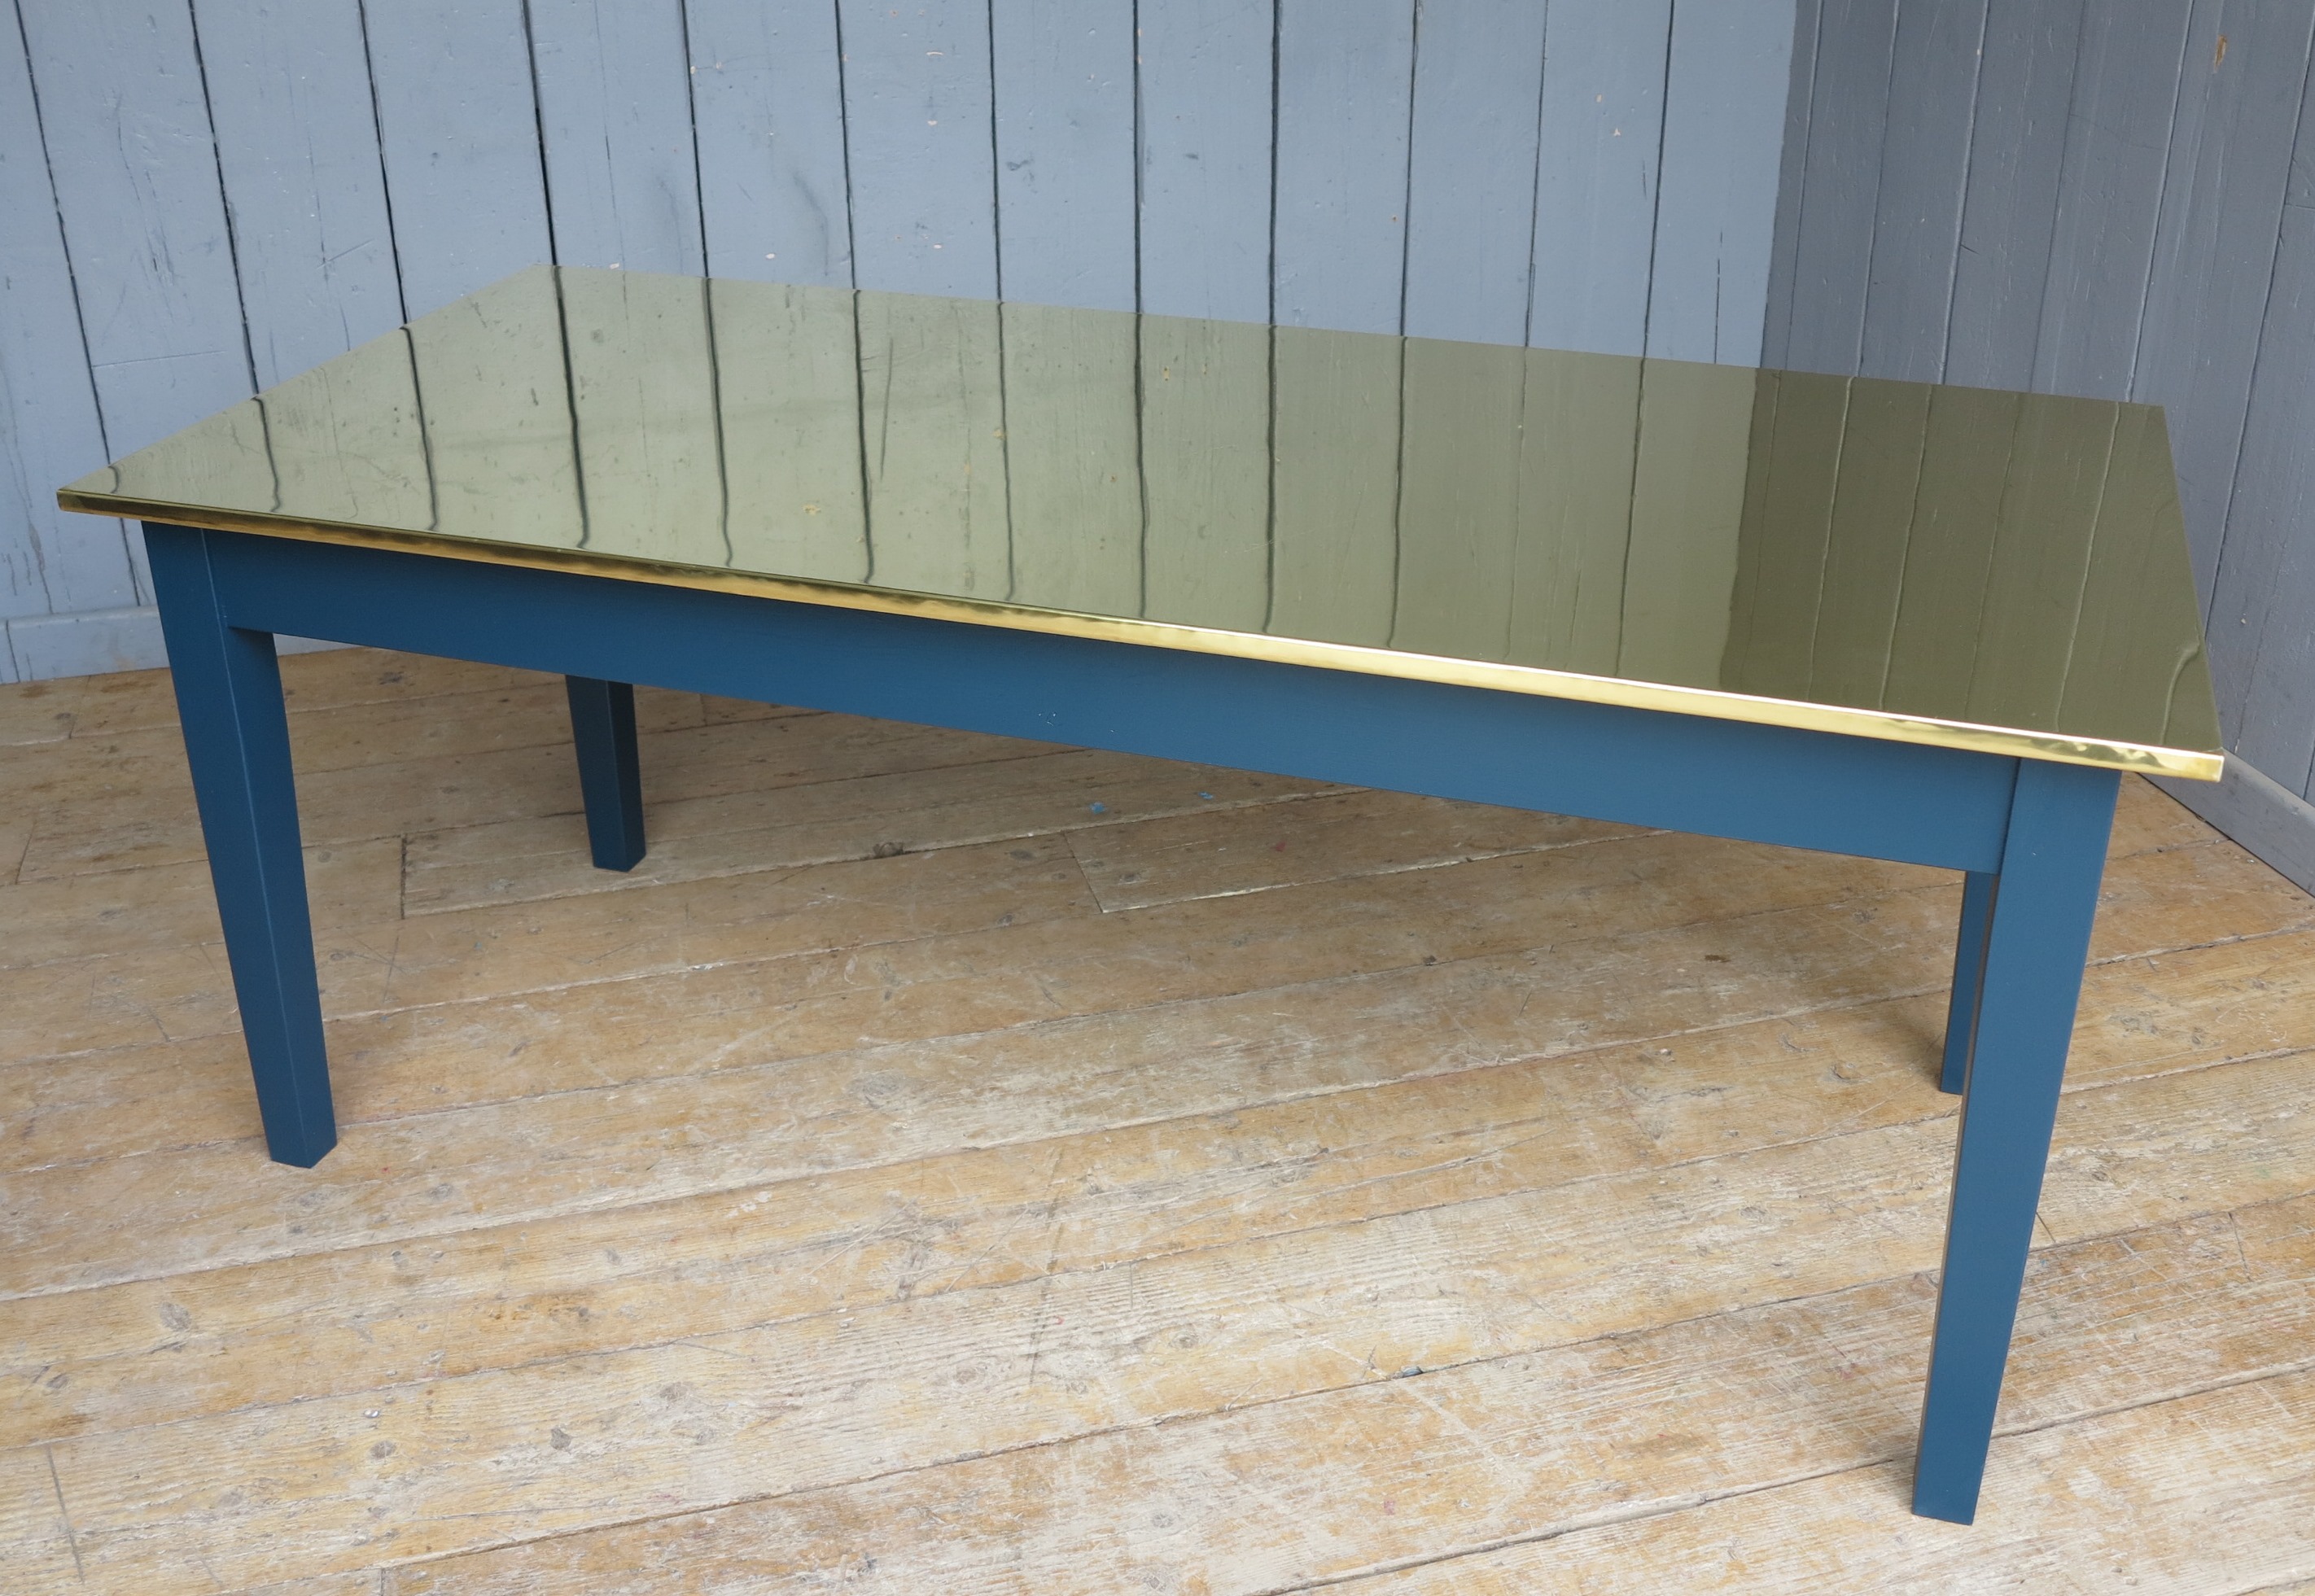 bespoke brass table made by hand at UKAA to individual specifications and requirements. Table base painted in Farrow and Ball Hague Blue.